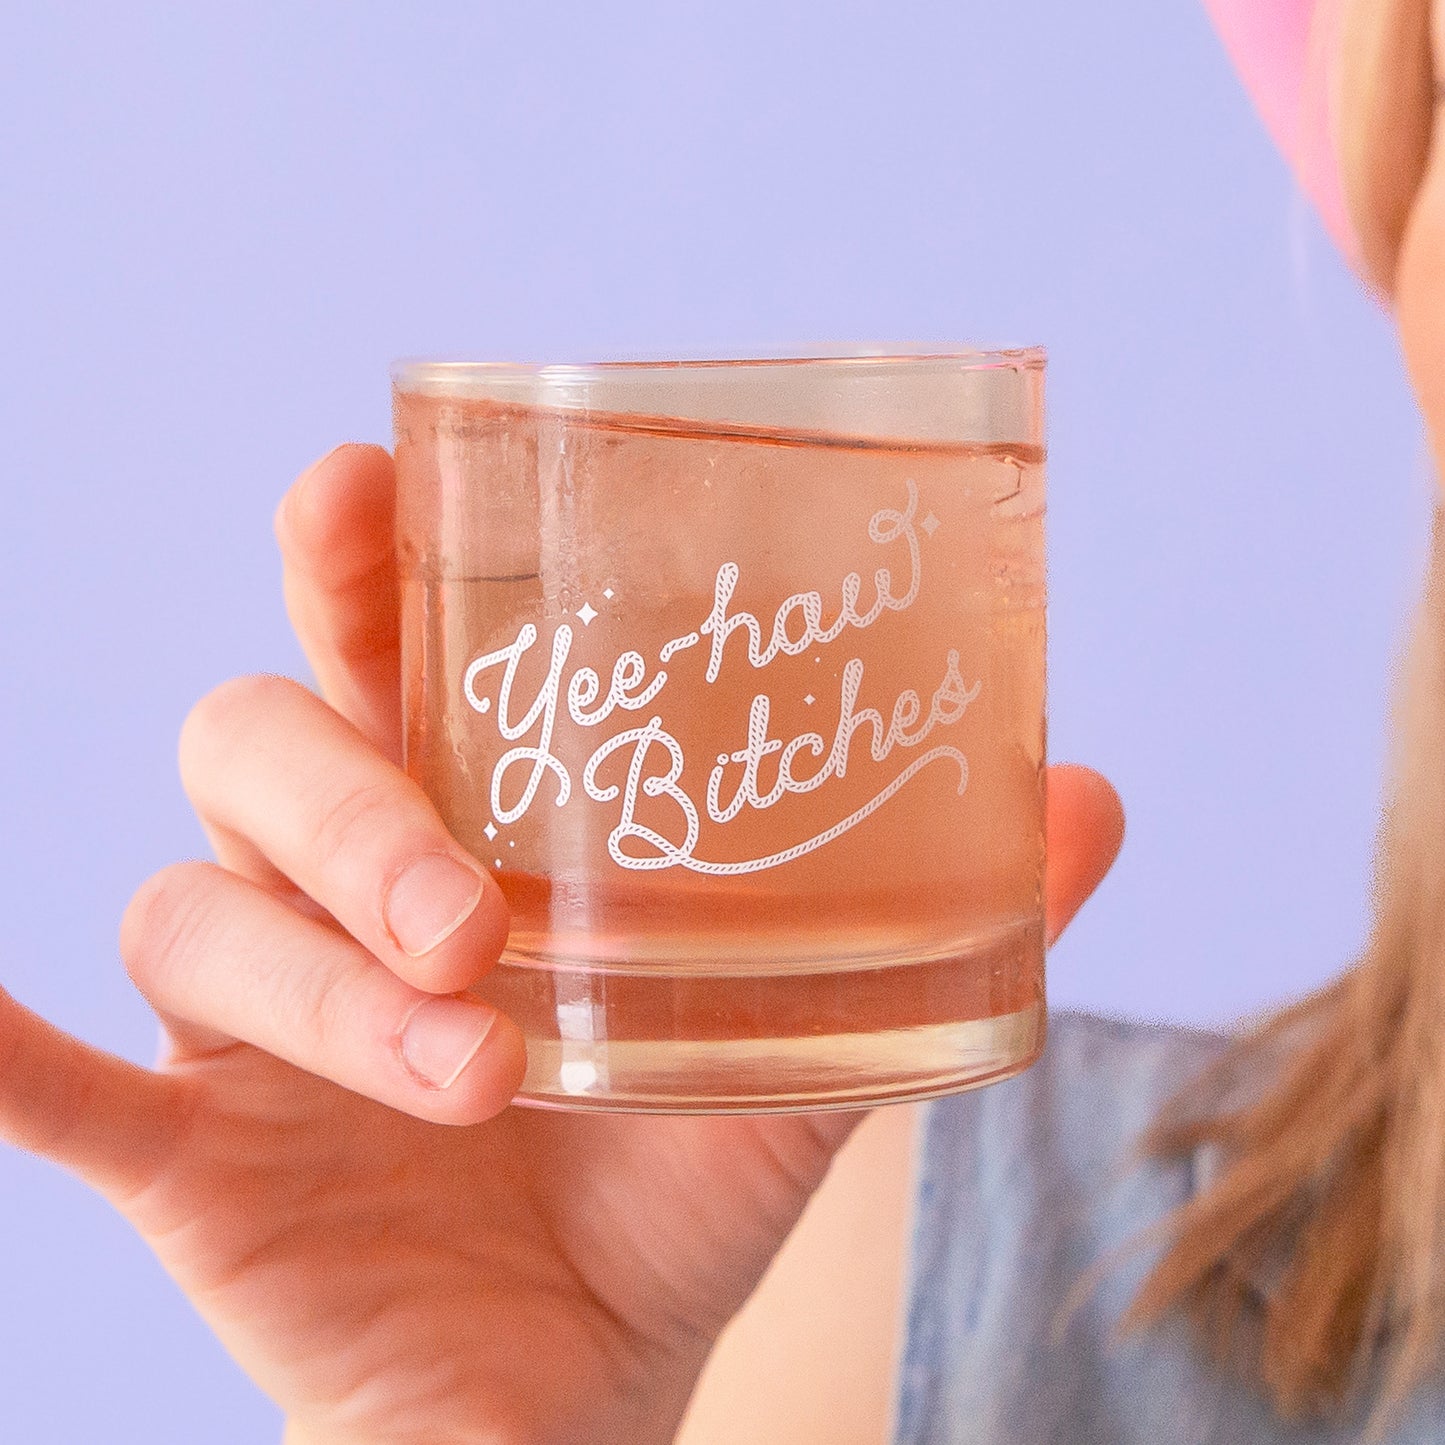 A short glass tumbler with white screenprinted text that reads, "Yee-haw Bitches".